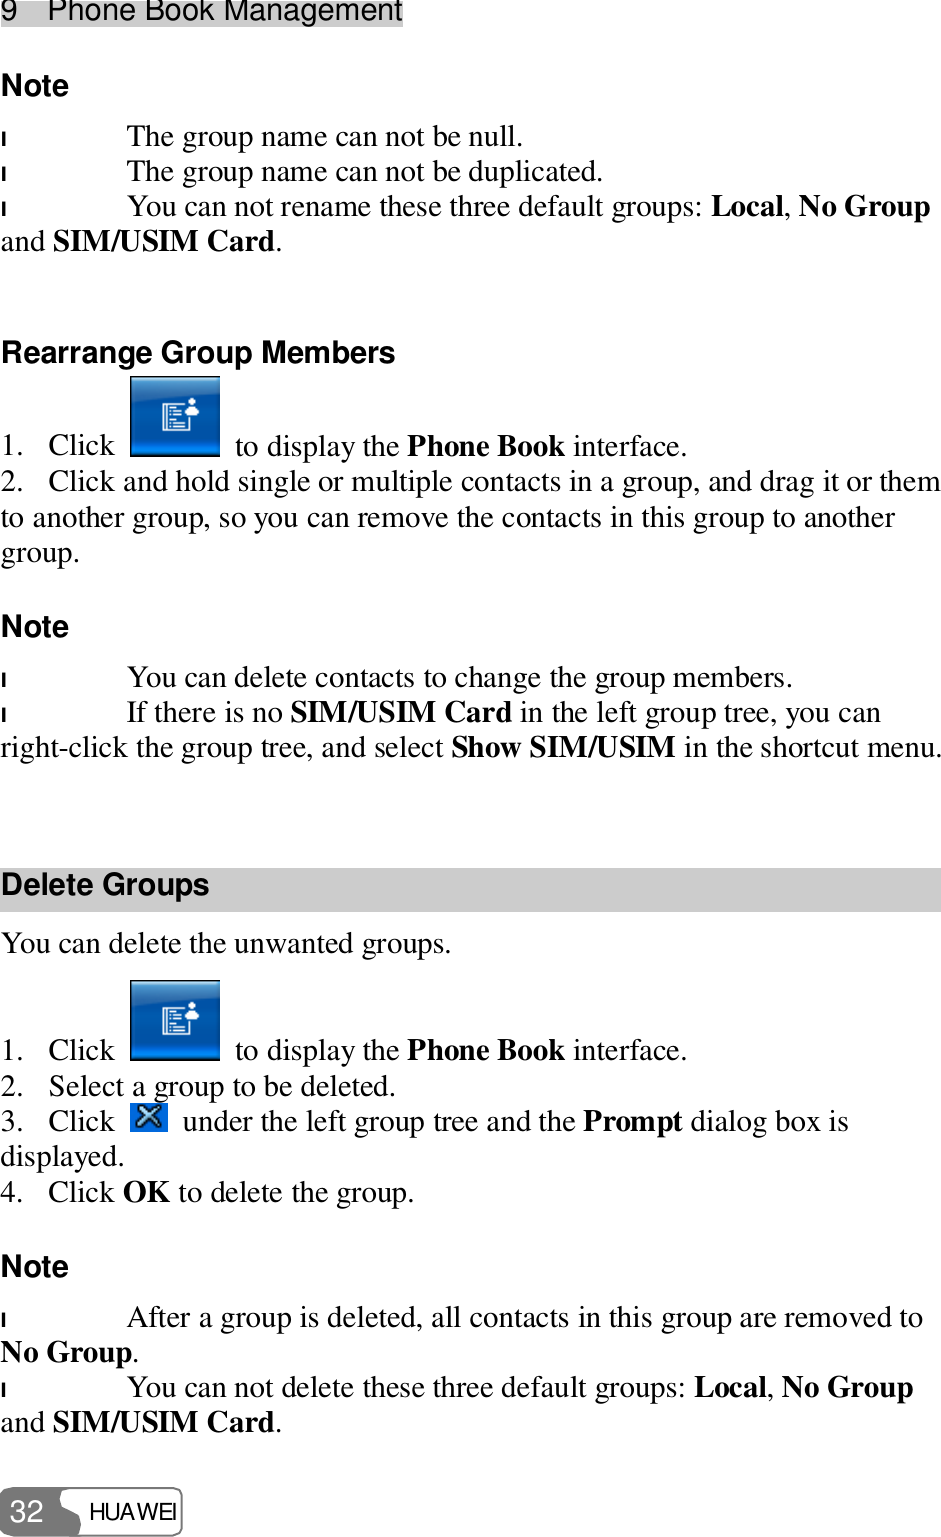 9  Phone Book Management HUAWEI  32 Note  l The group name can not be null. l The group name can not be duplicated. l You can not rename these three default groups: Local, No Group and SIM/USIM Card.  Rearrange Group Members 1. Click   to display the Phone Book interface. 2. Click and hold single or multiple contacts in a group, and drag it or them to another group, so you can remove the contacts in this group to another group. Note  l You can delete contacts to change the group members. l If there is no SIM/USIM Card in the left group tree, you can right-click the group tree, and select Show SIM/USIM in the shortcut menu.  Delete Groups You can delete the unwanted groups. 1. Click   to display the Phone Book interface. 2. Select a group to be deleted. 3. Click   under the left group tree and the Prompt dialog box is displayed. 4. Click OK to delete the group. Note  l After a group is deleted, all contacts in this group are removed to No Group. l You can not delete these three default groups: Local, No Group and SIM/USIM Card. 